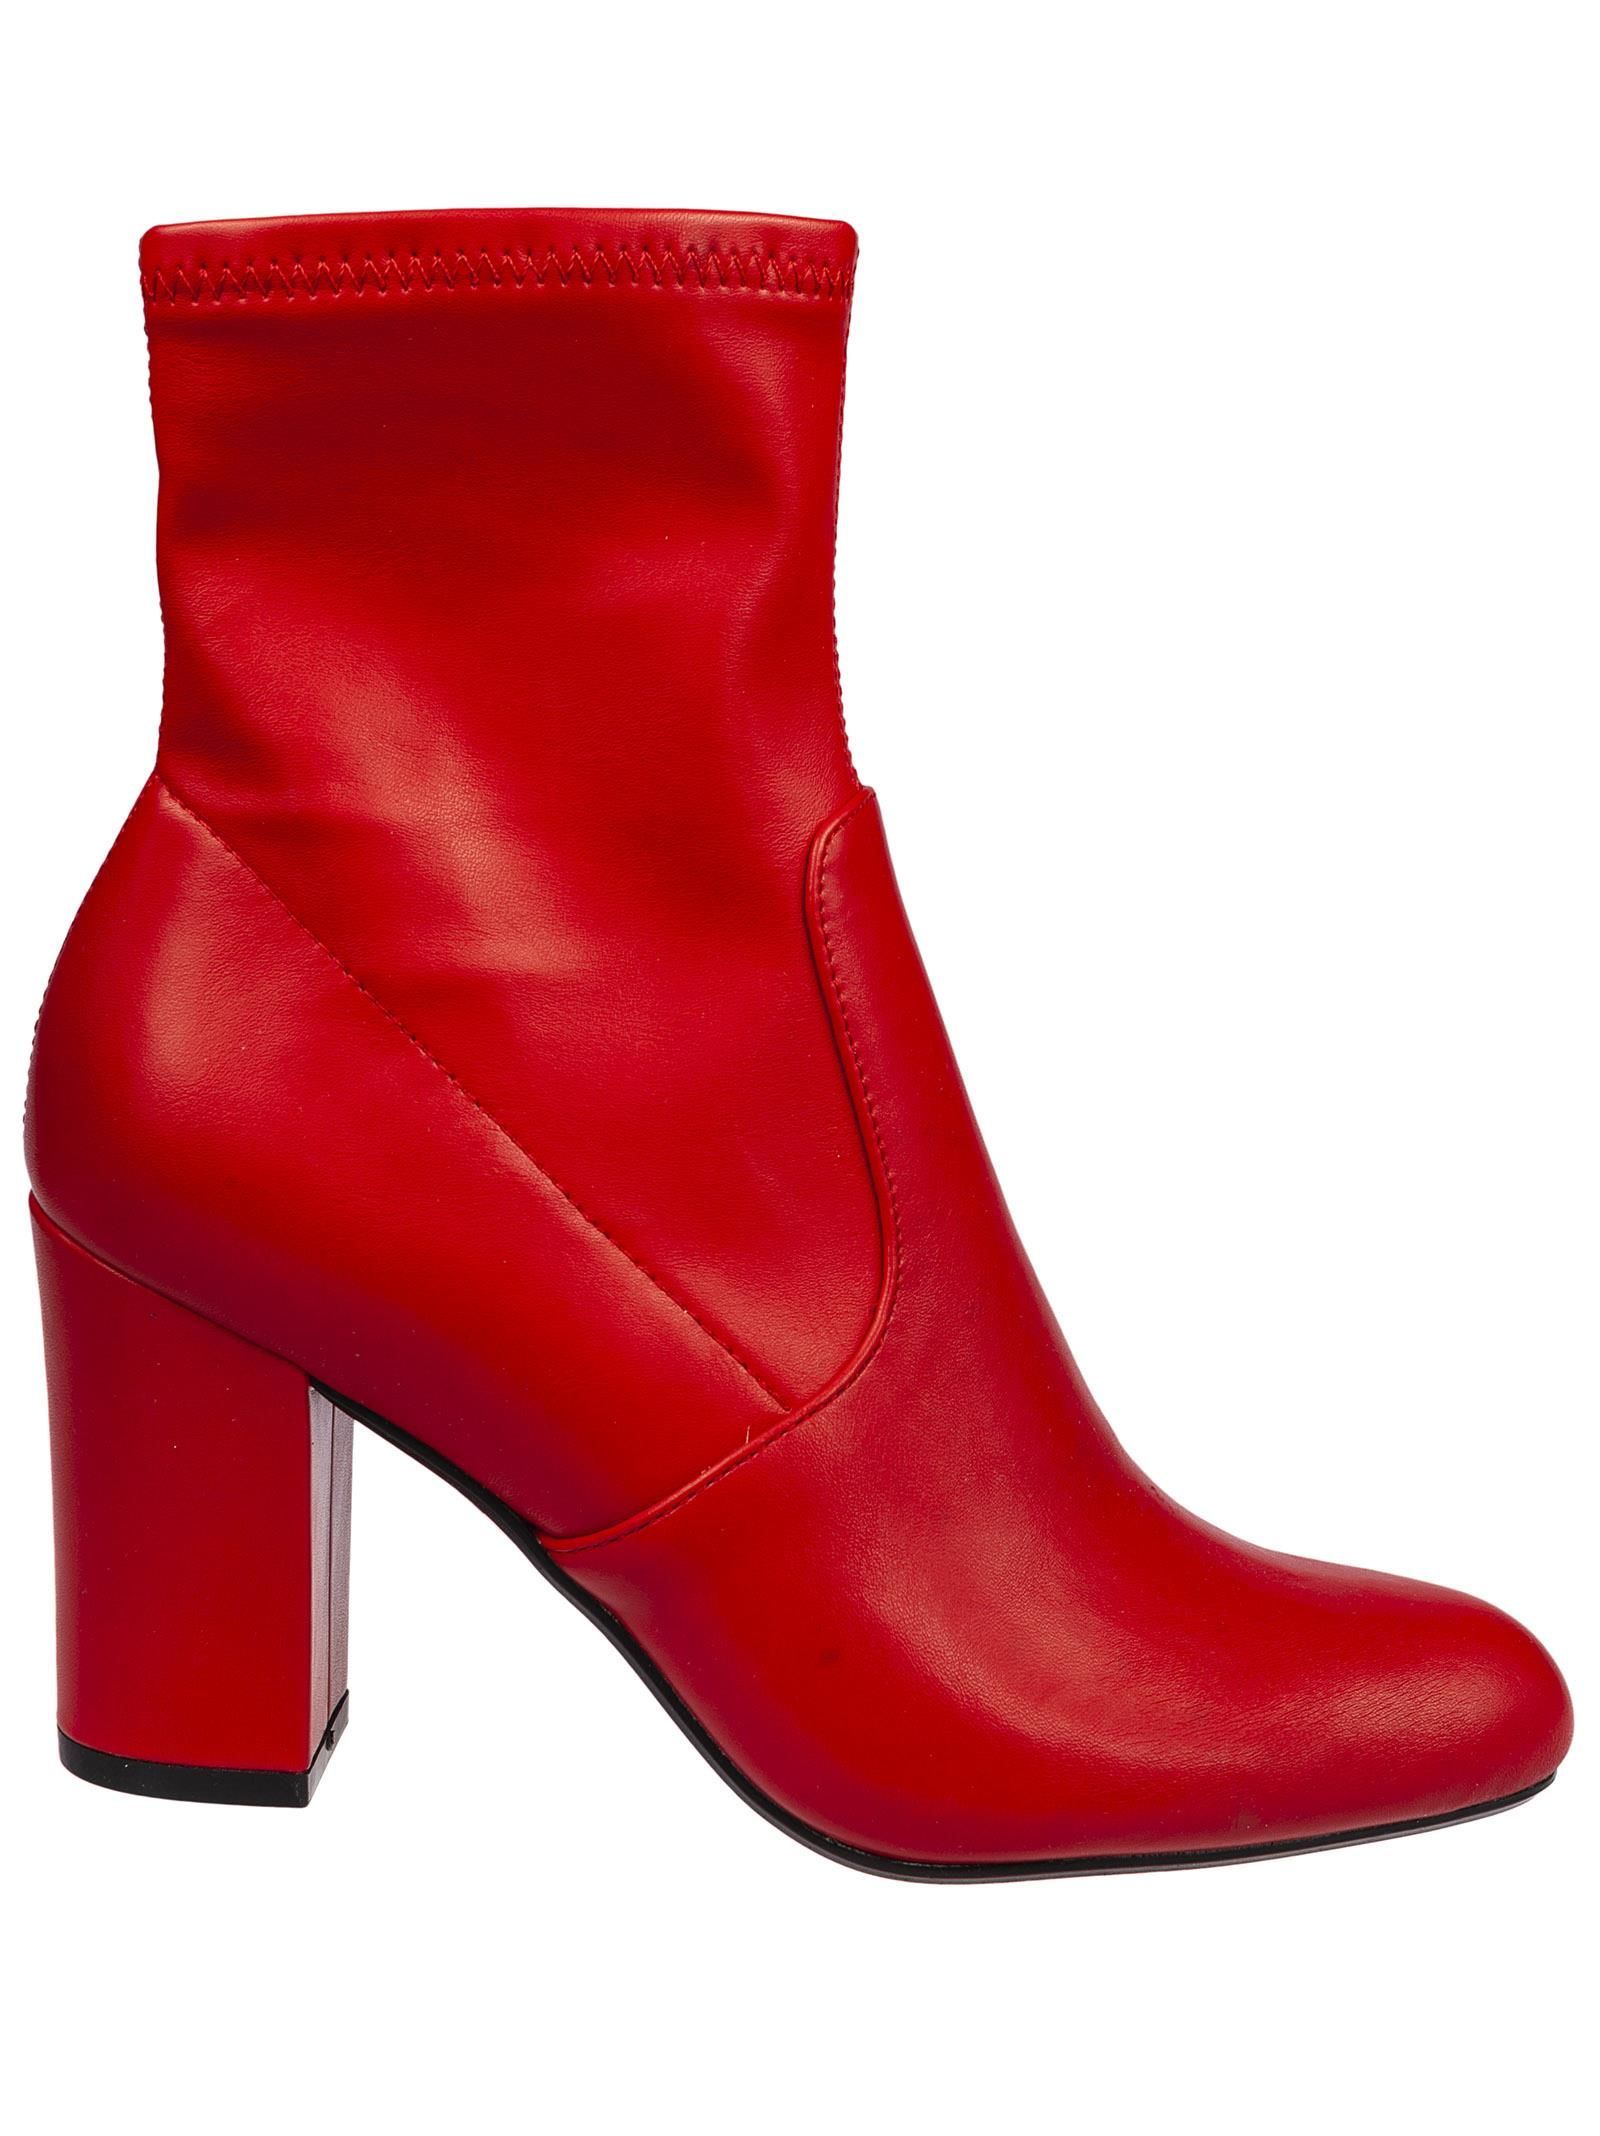 Steve Madden Zipped Ankle Boots | Italist.com US